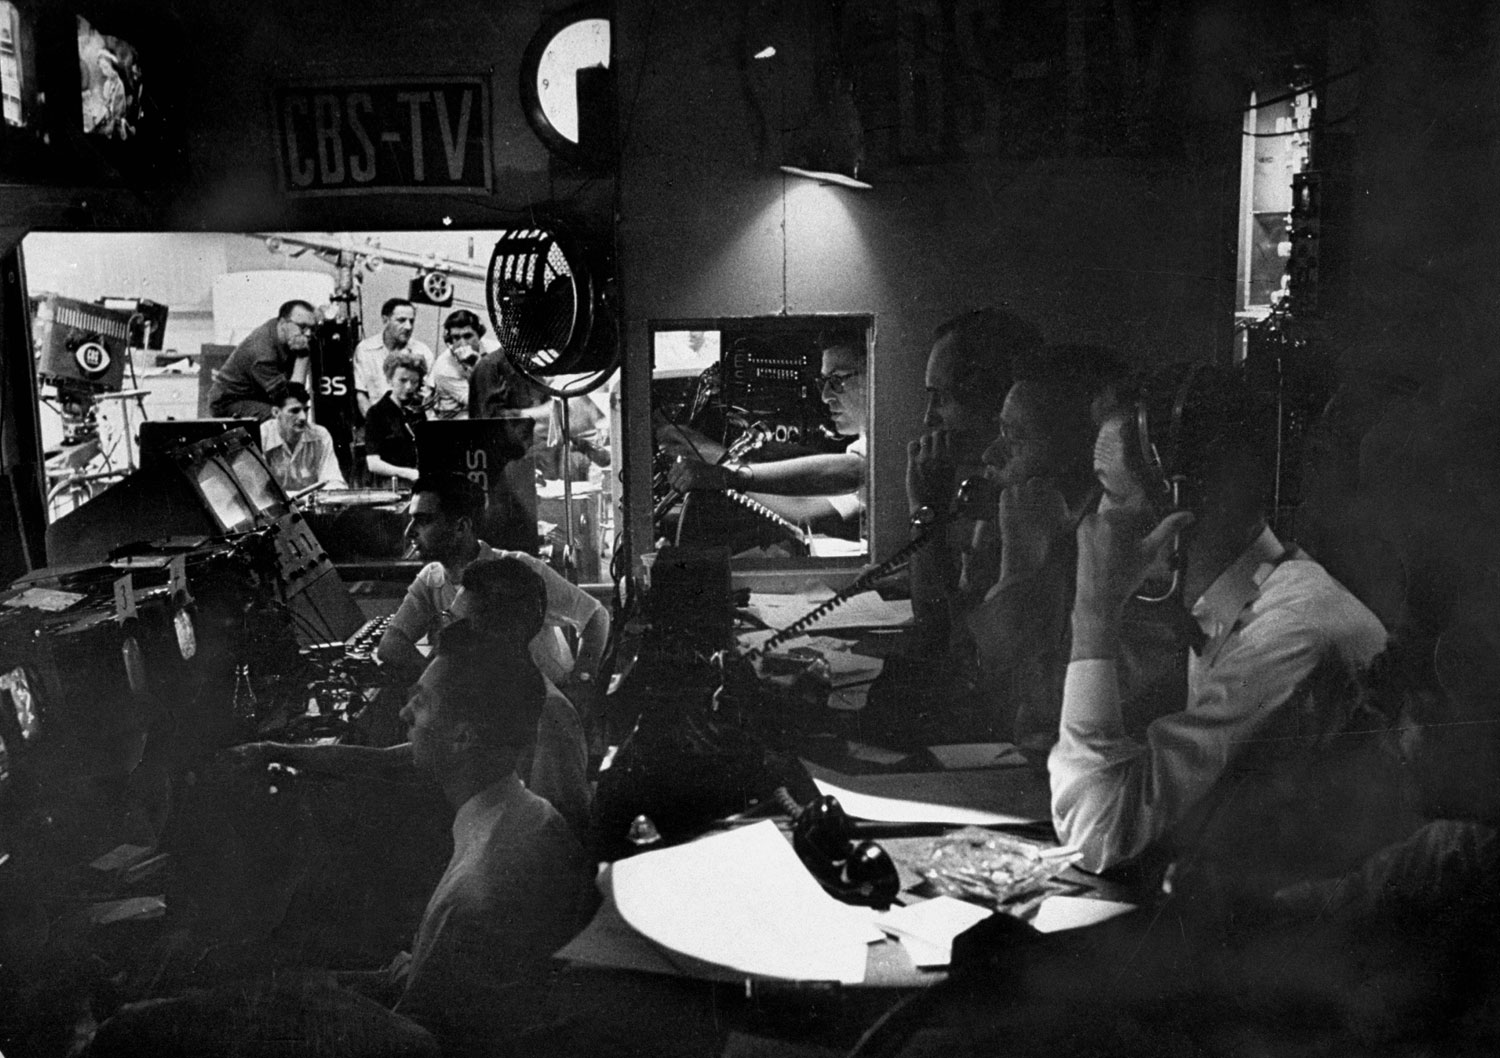 Control booth, 1952 GOP National Convention in Chicago.